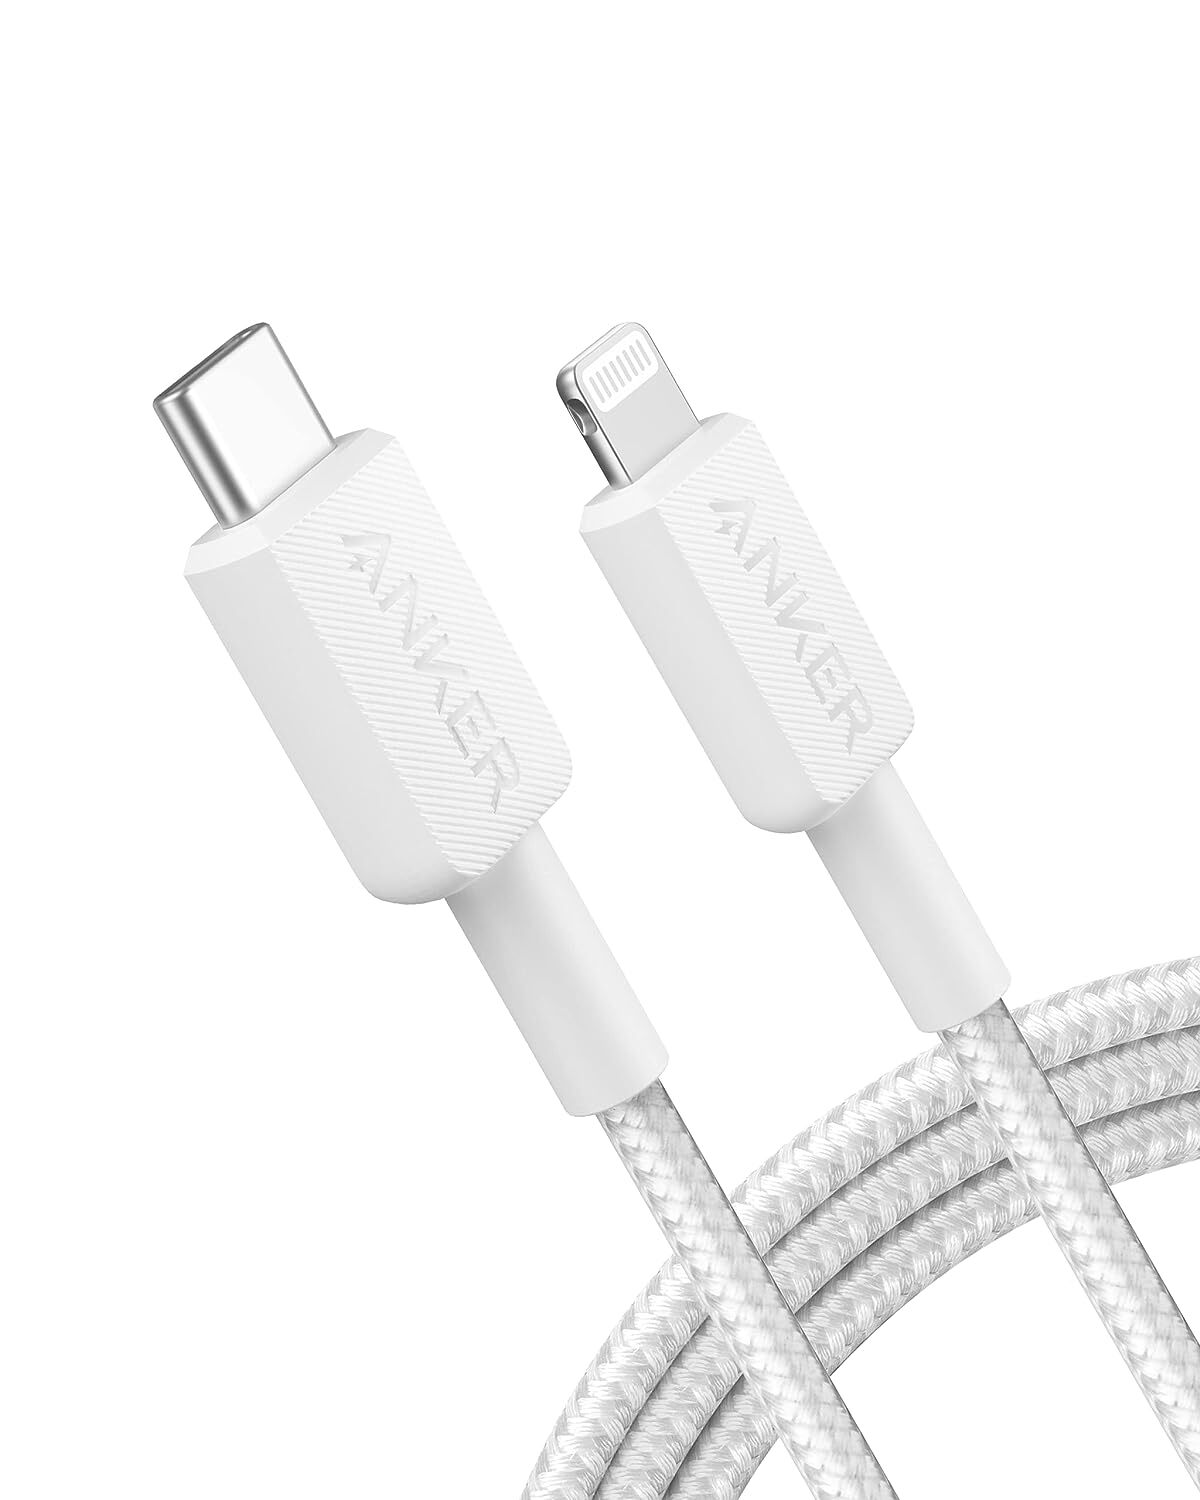 Anker Cable 322 USB-C to Lightning (6 ft. Braided) White-A81B6H21-M00000001504